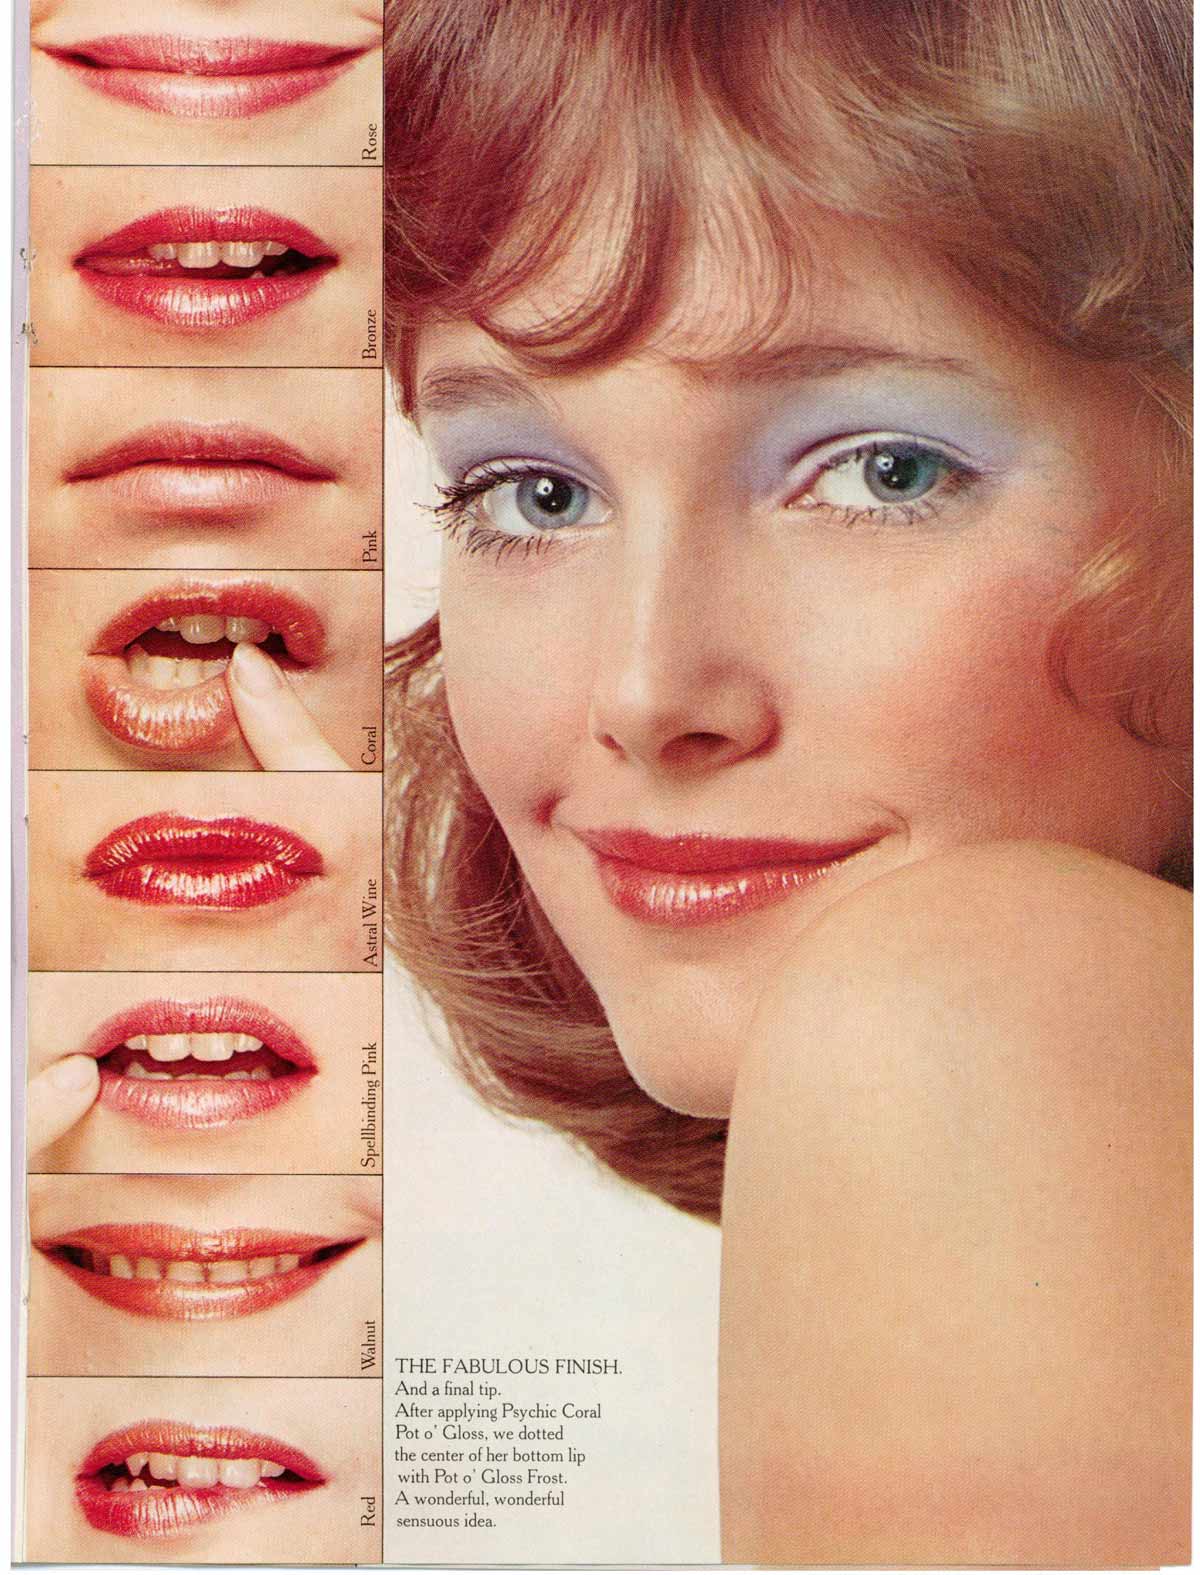 The 1970s Makeup Look - 5 key Points - Glamour Daze